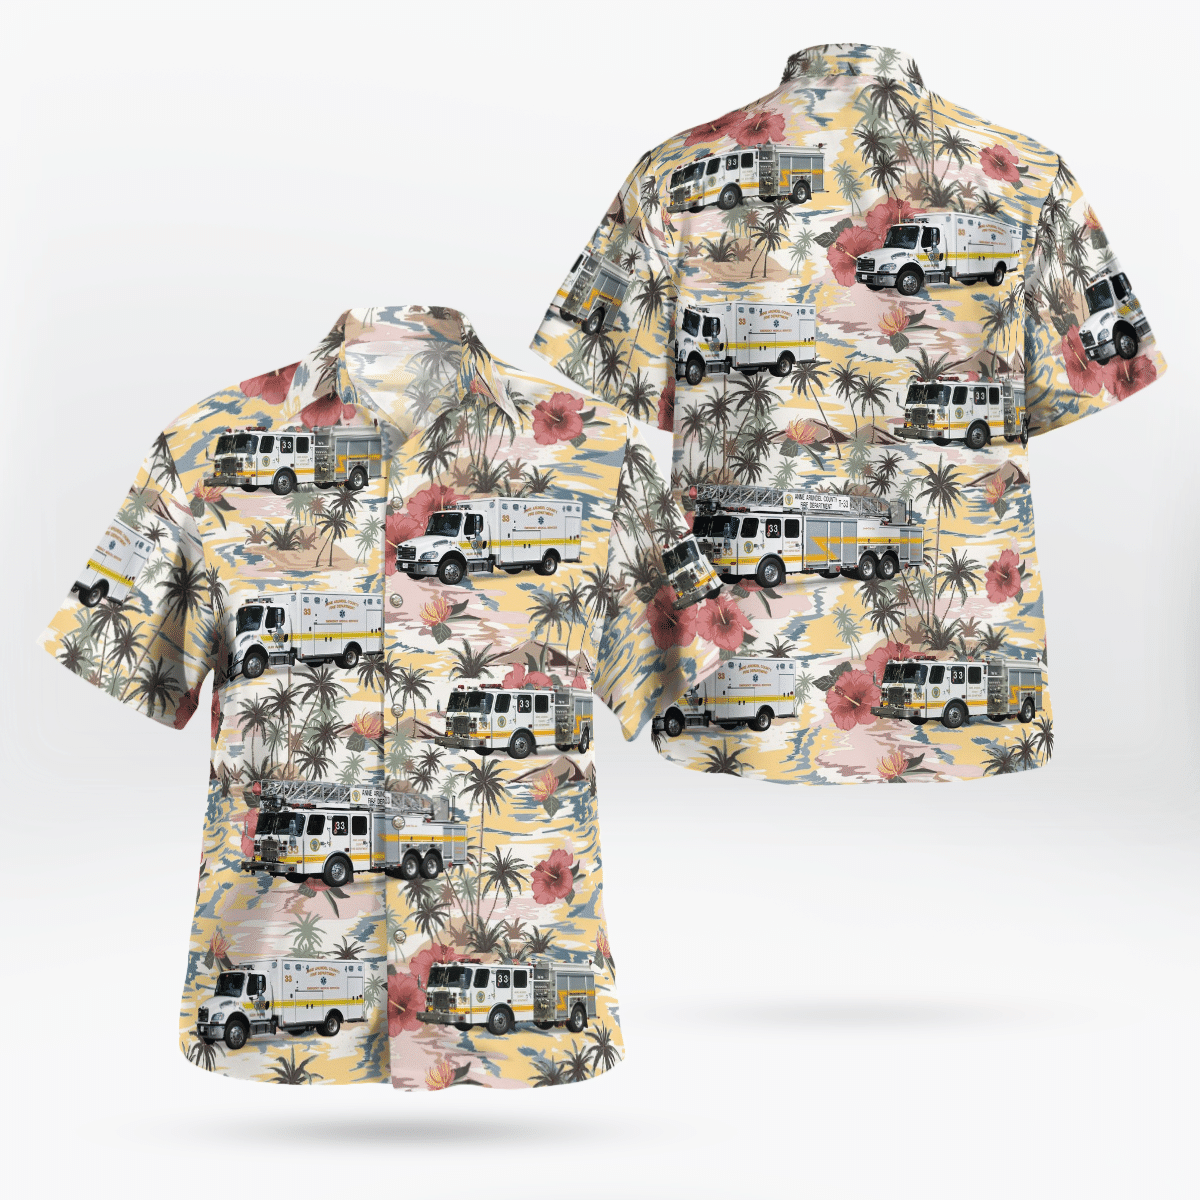 If you are in need of a new summertime look, pick up this Hawaiian shirt 84